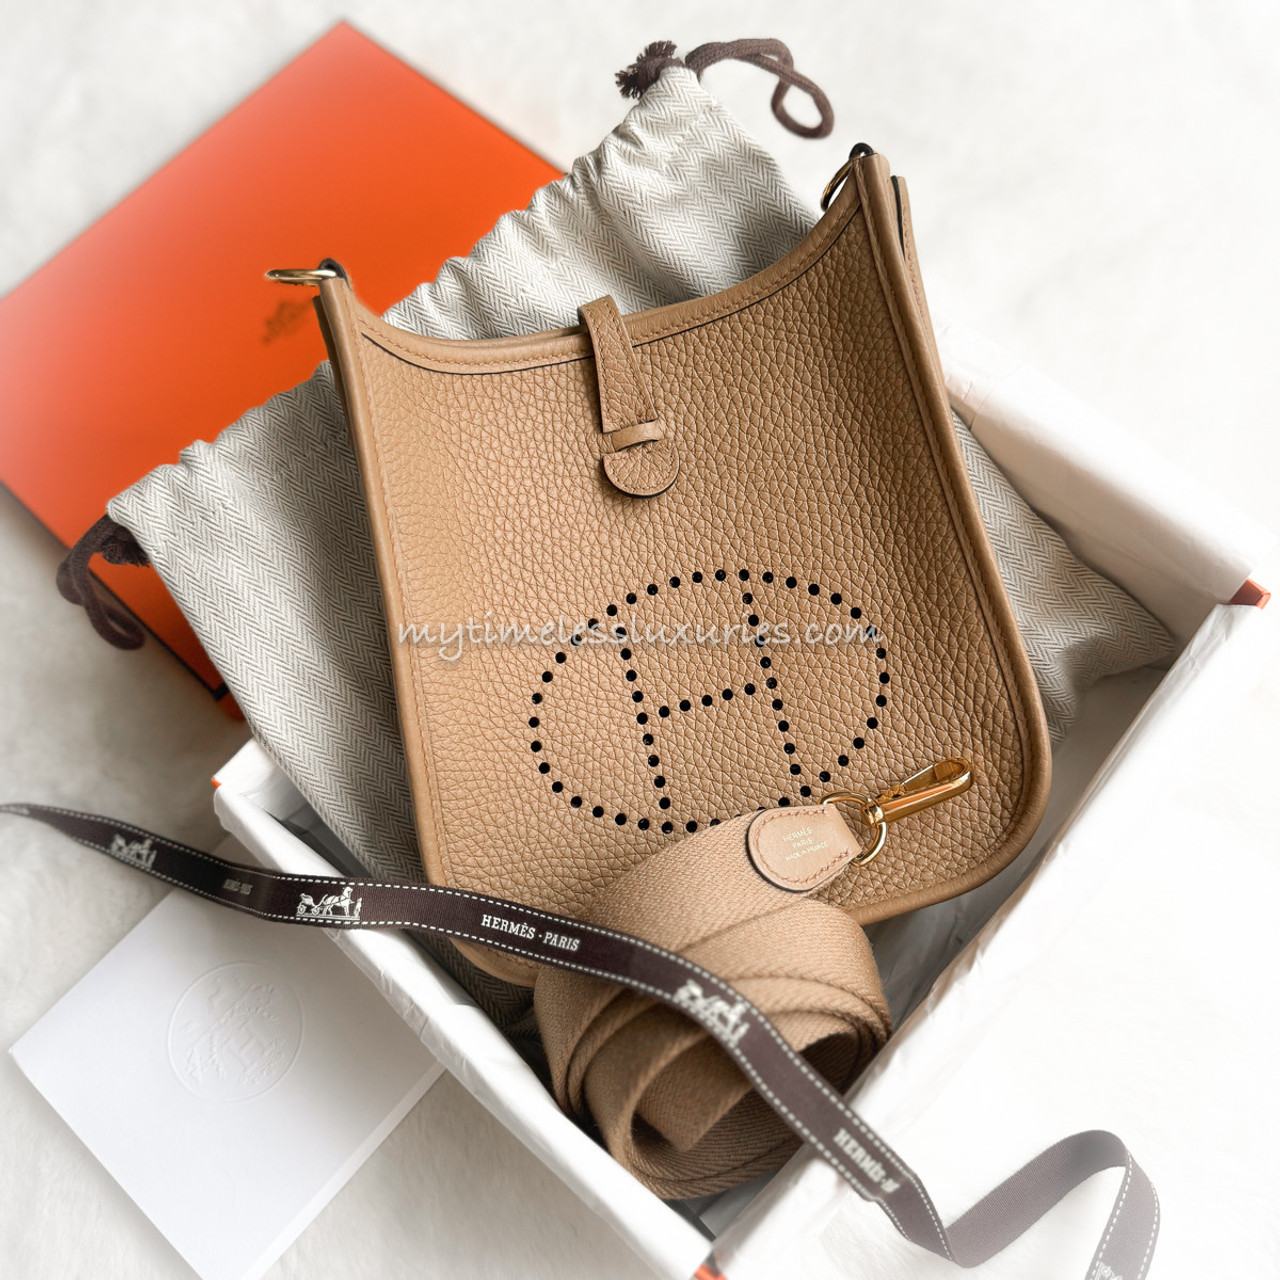 Hermes Mini Evelyne TPM Bag Gold Clemence Leather with Gold